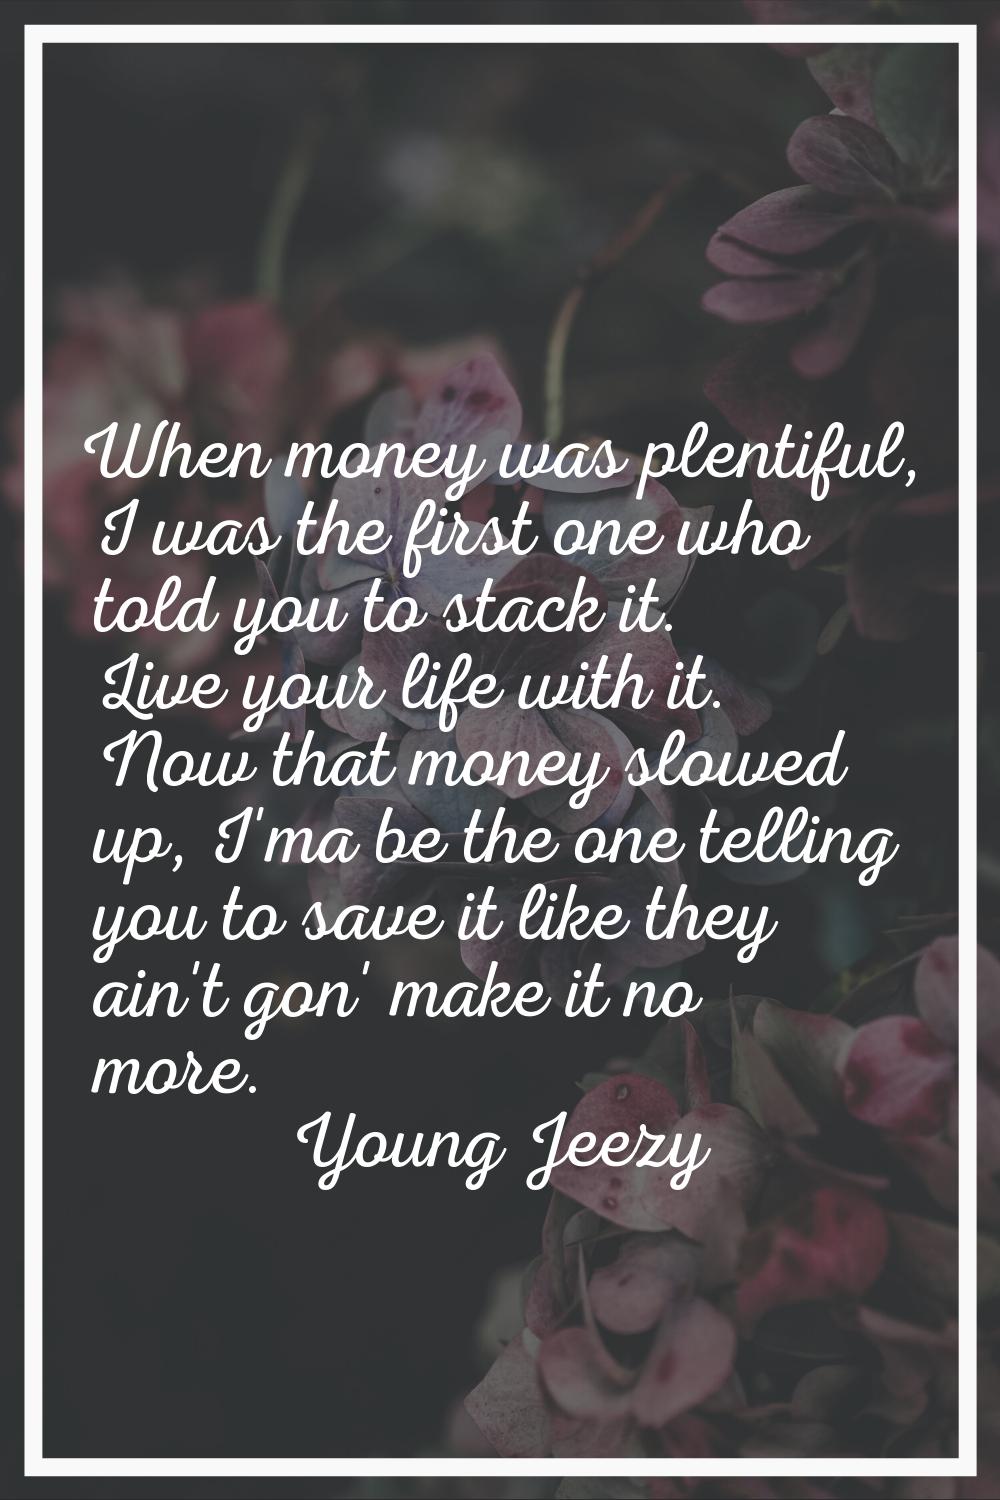 When money was plentiful, I was the first one who told you to stack it. Live your life with it. Now